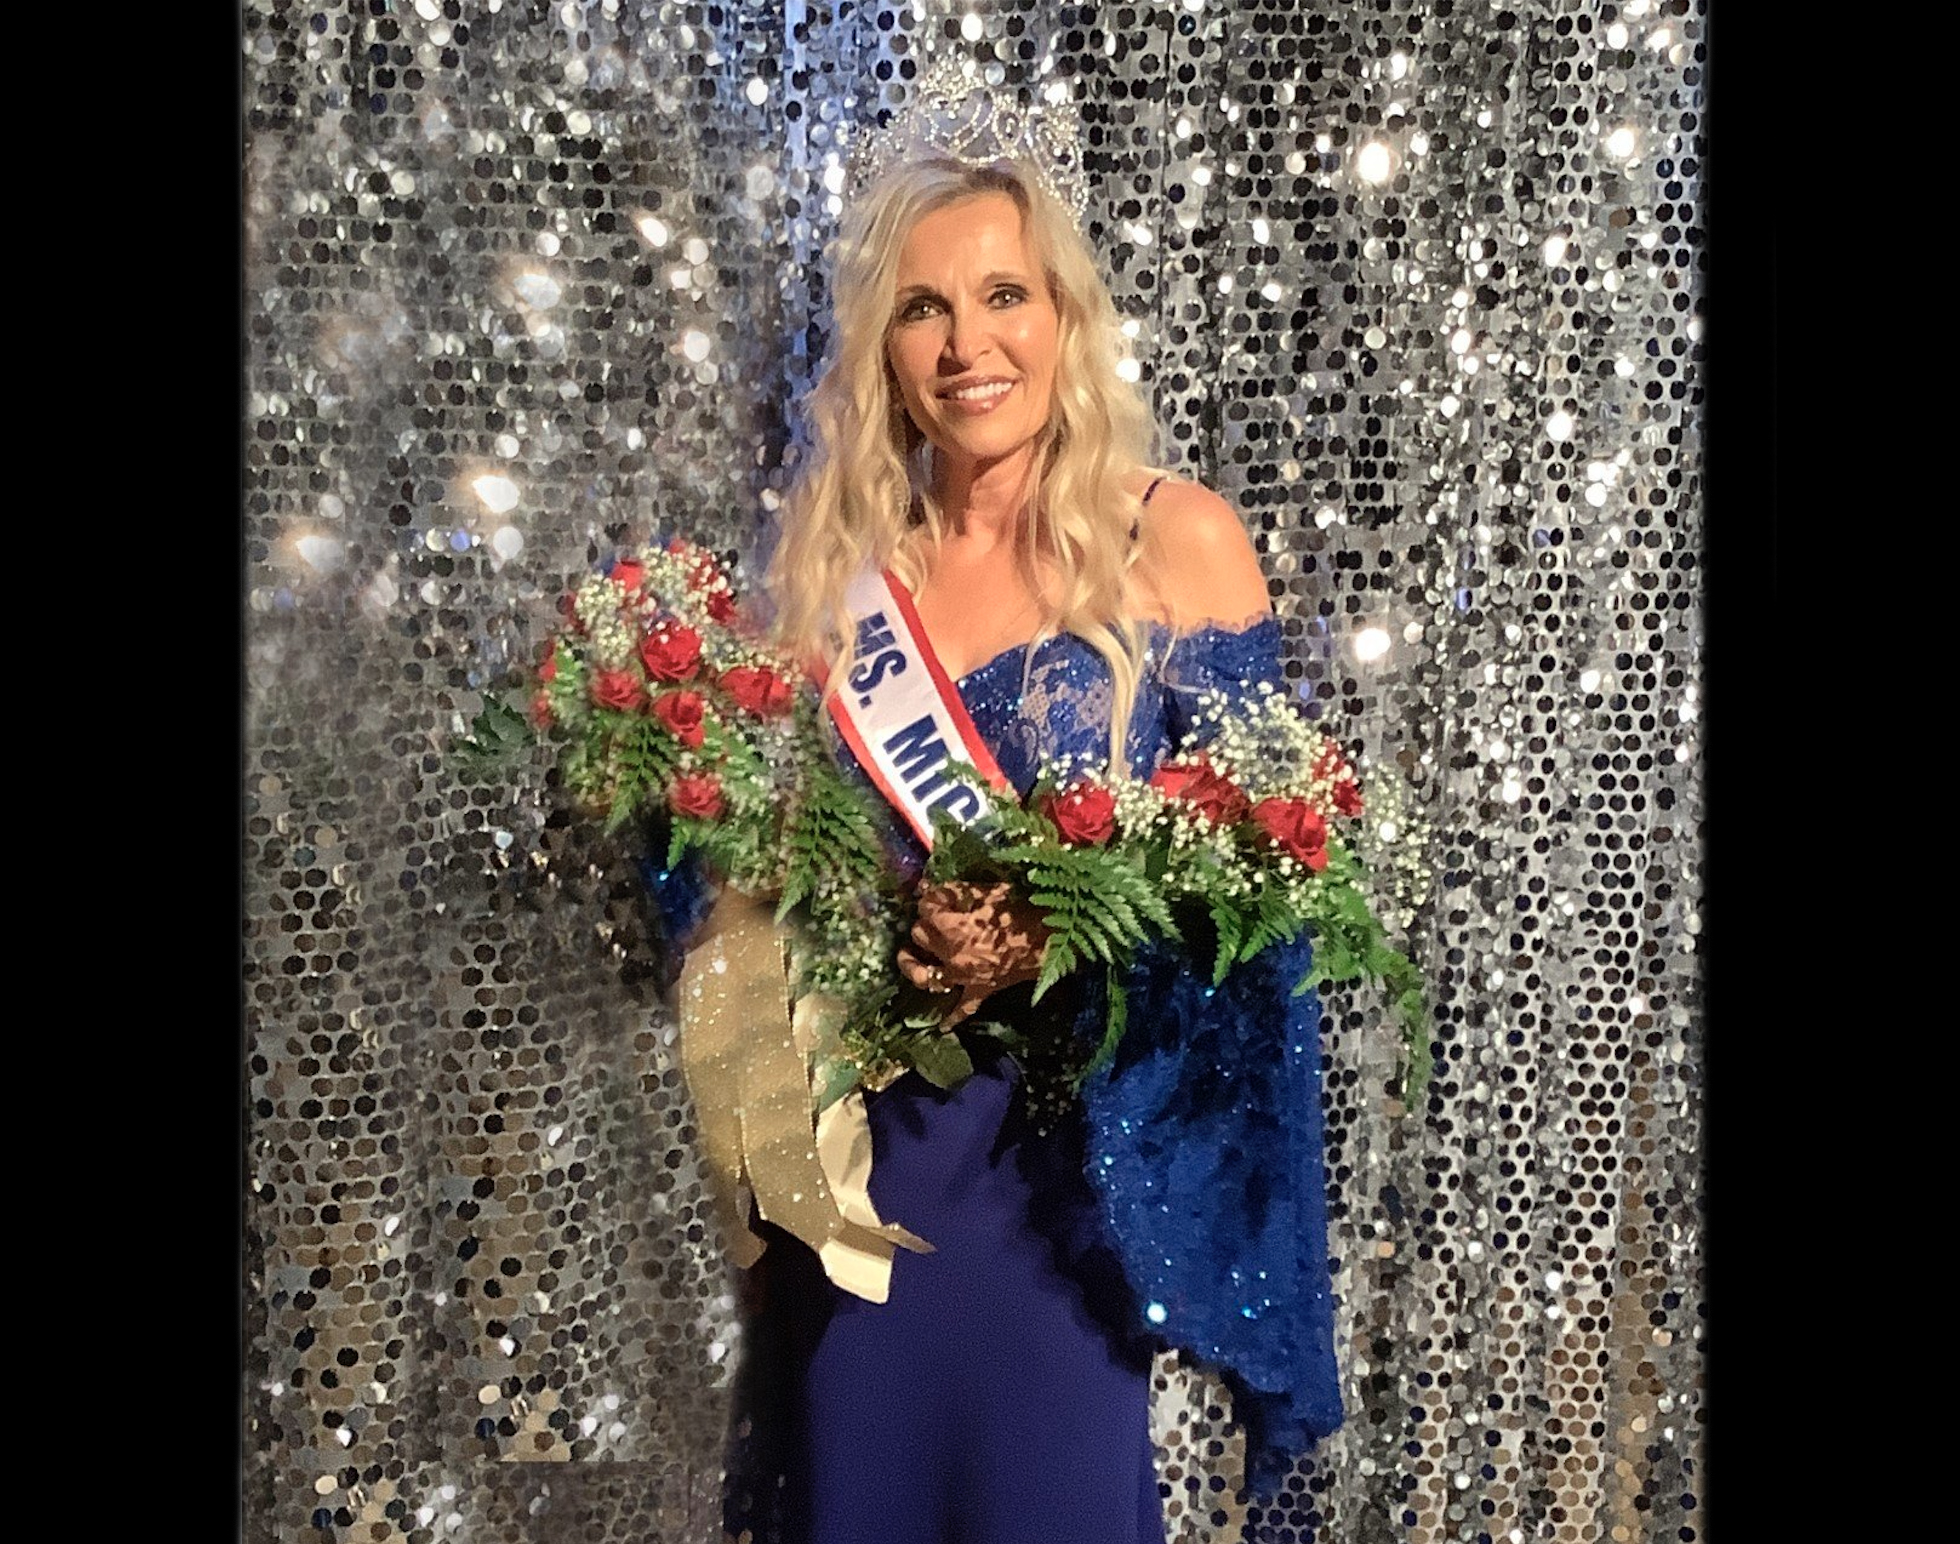 Pageant glamour for Ms. Senior America, News